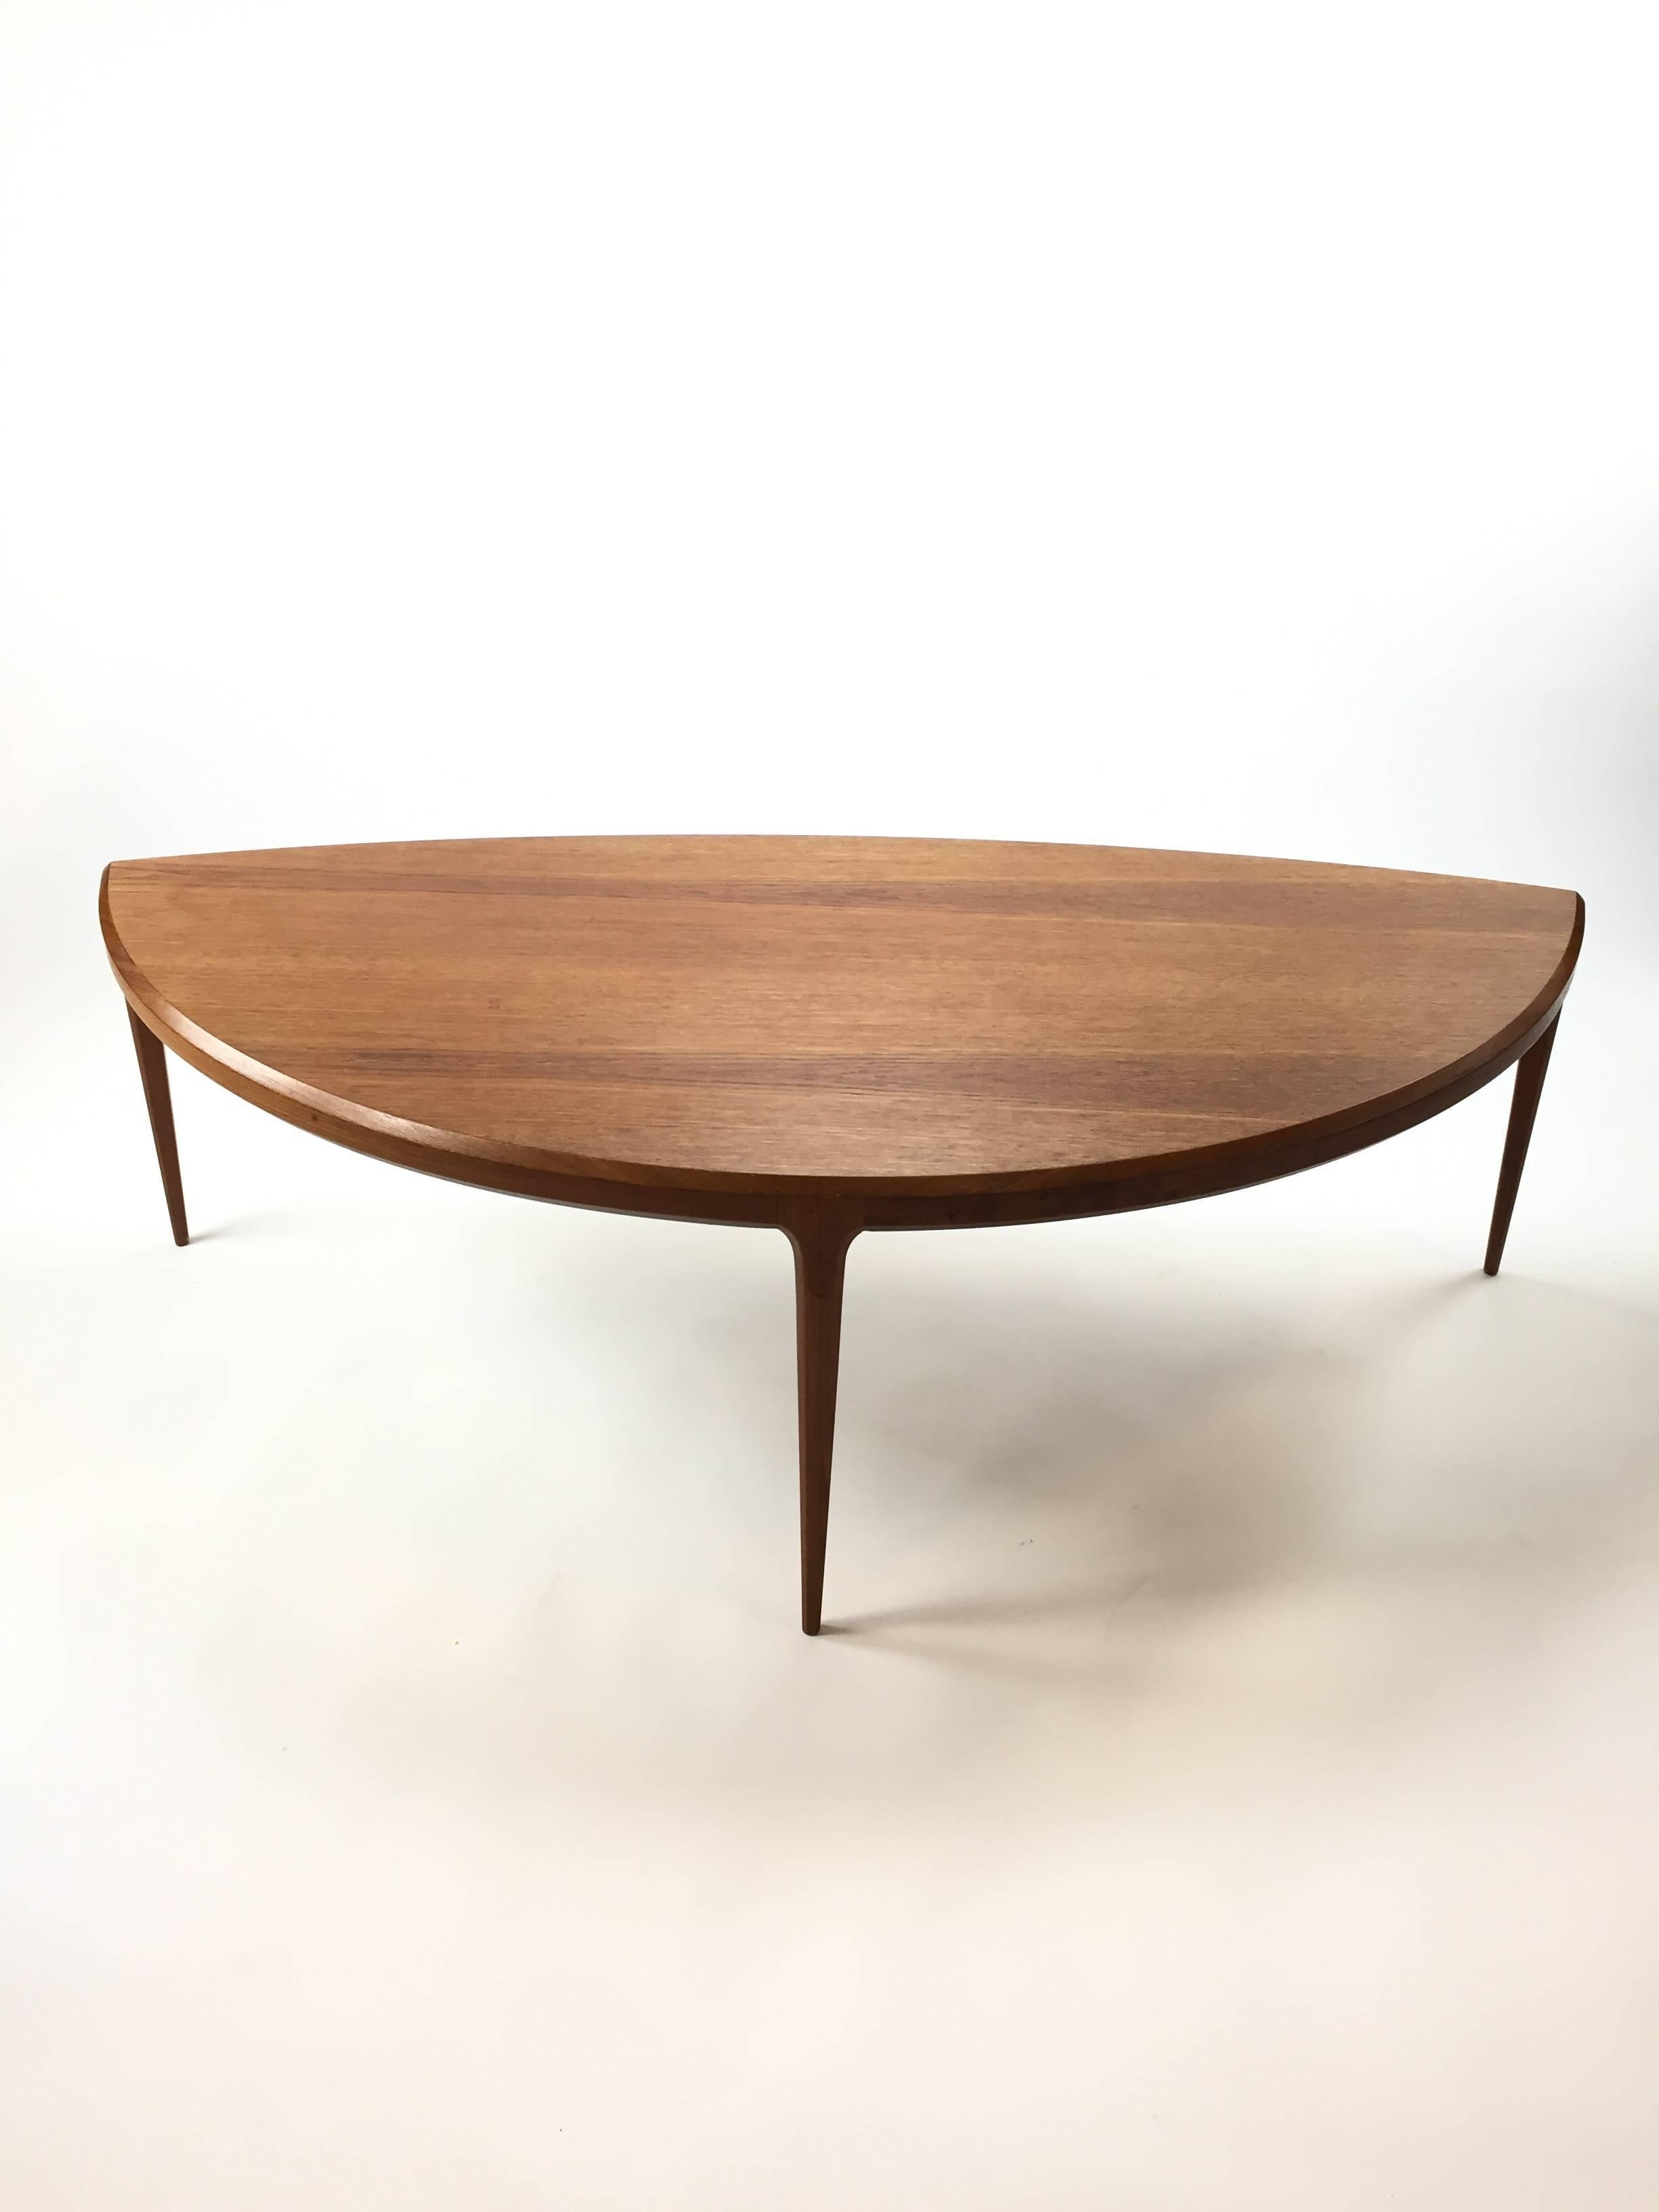 Oval demilune shaped cocktail table by Johannes Andersen for CC Silkeborg. Teak, Denmark, circa 1960.